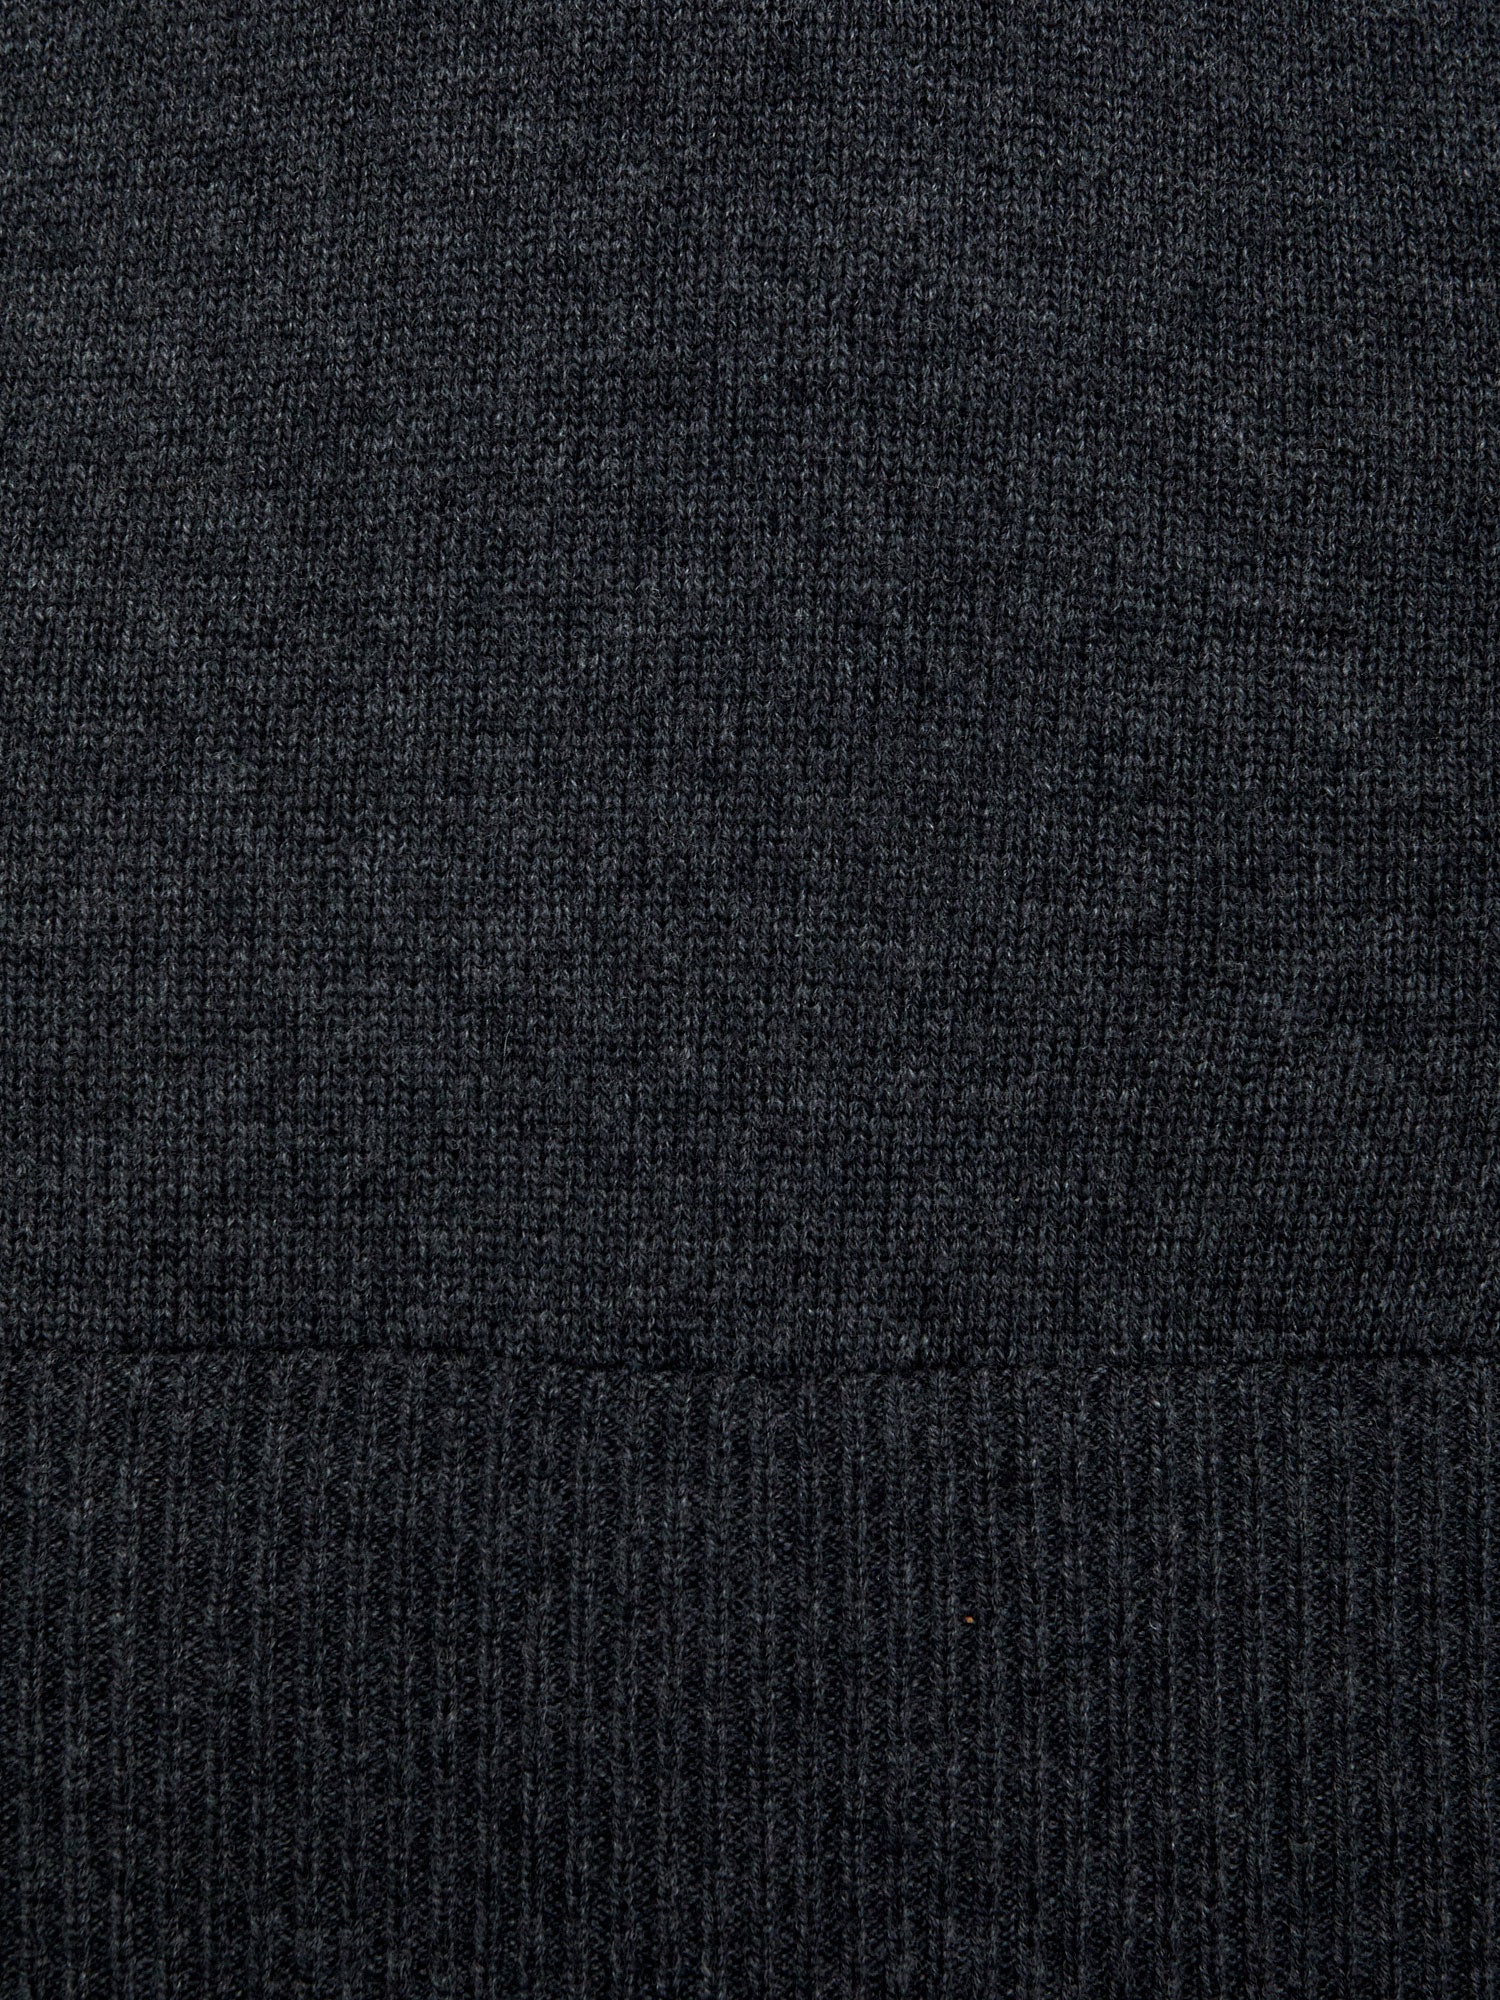 Looker layered v-neck grey and black mini sweater dress close up